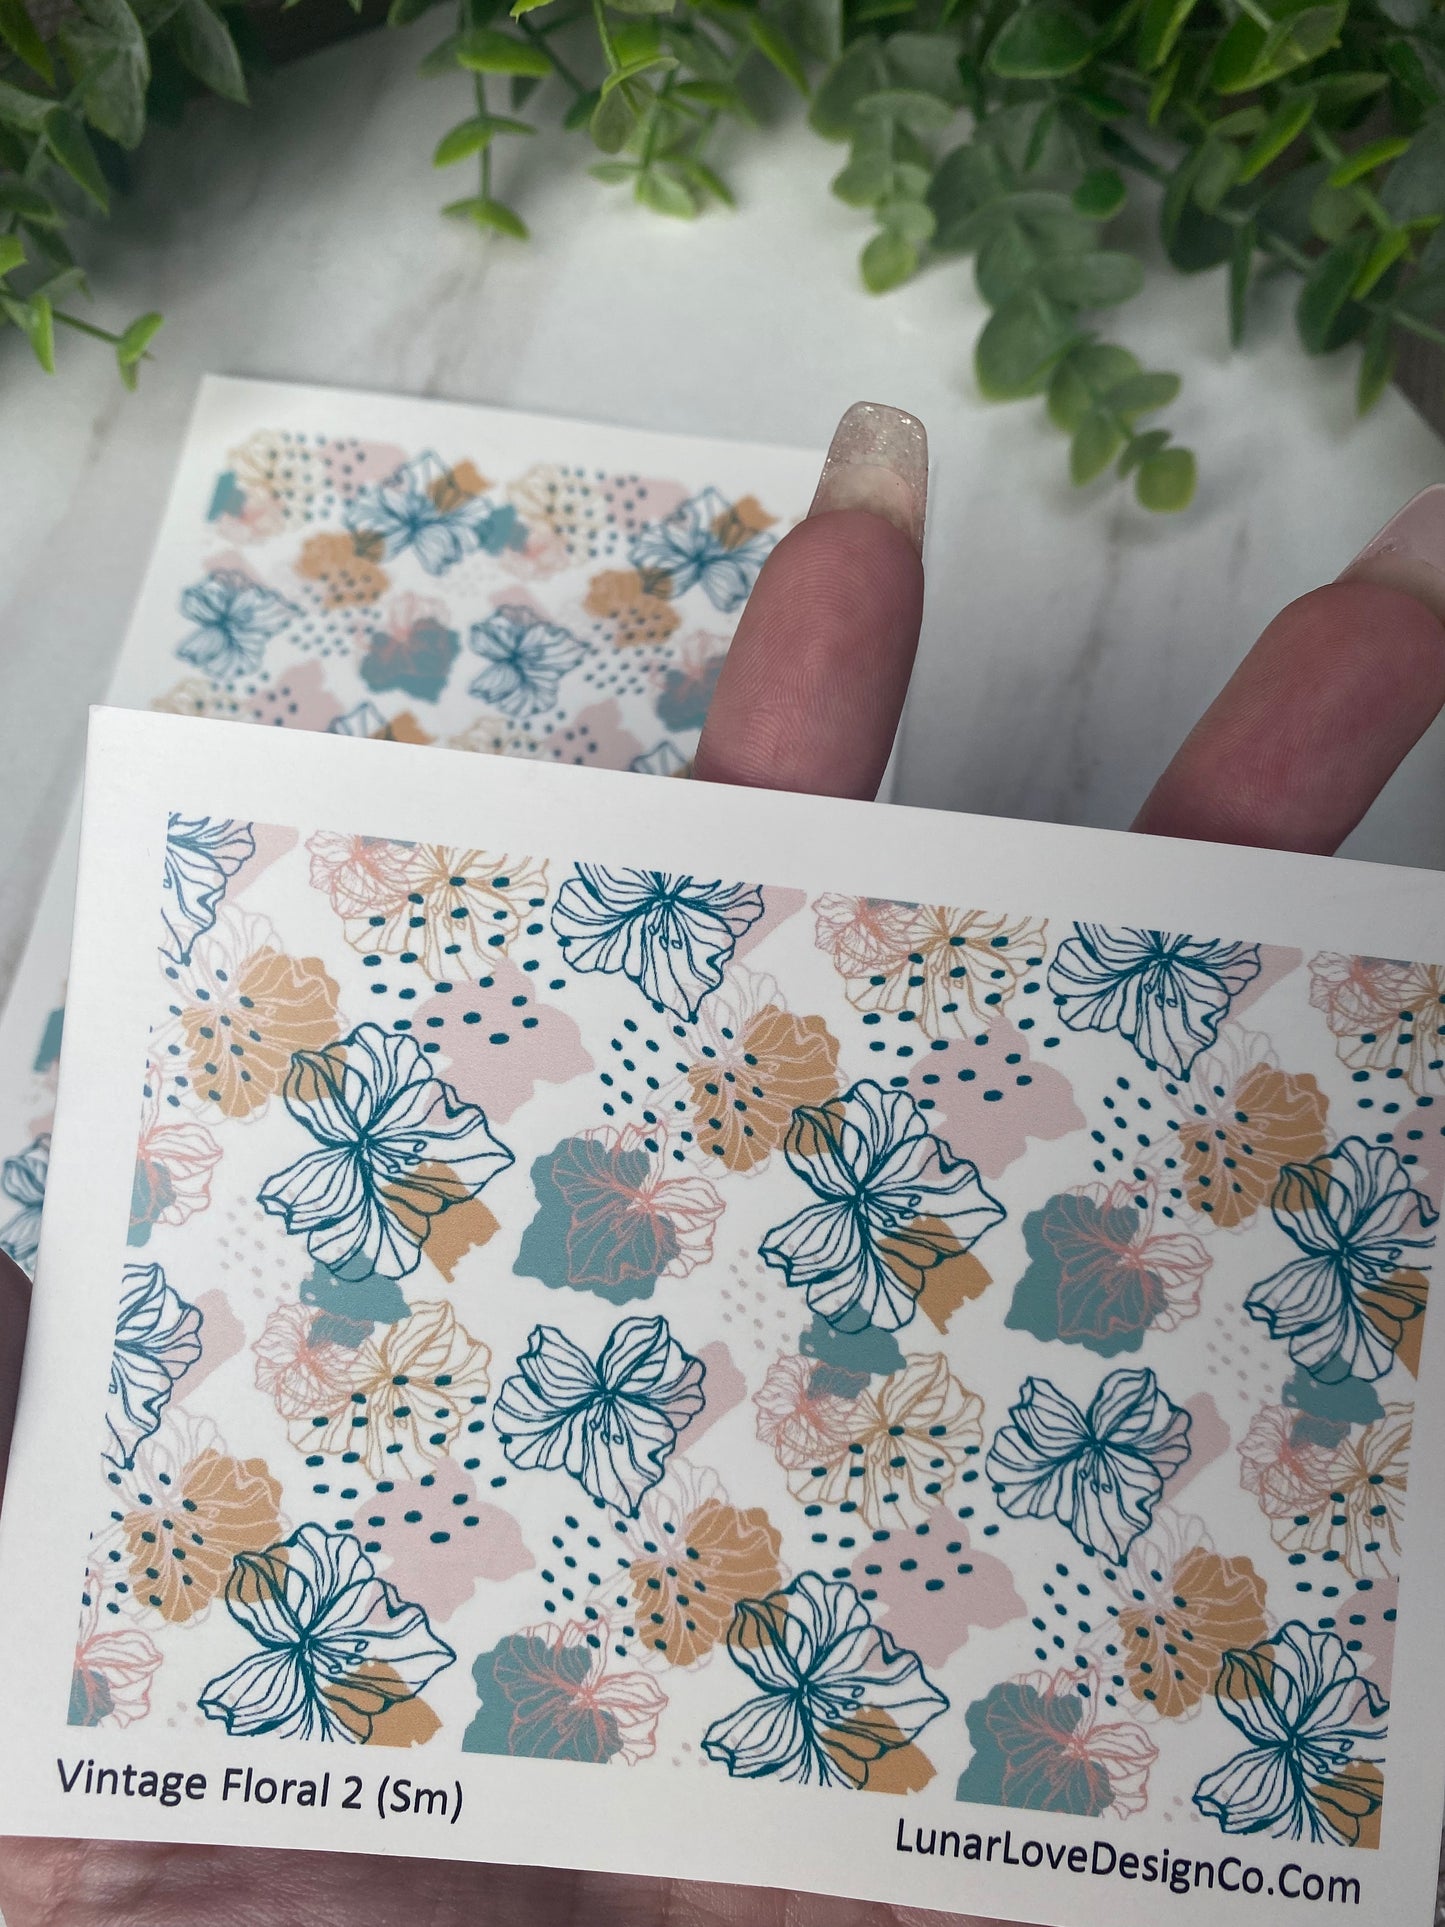 Vintage Floral 2 - Clay Tattoo Sheet